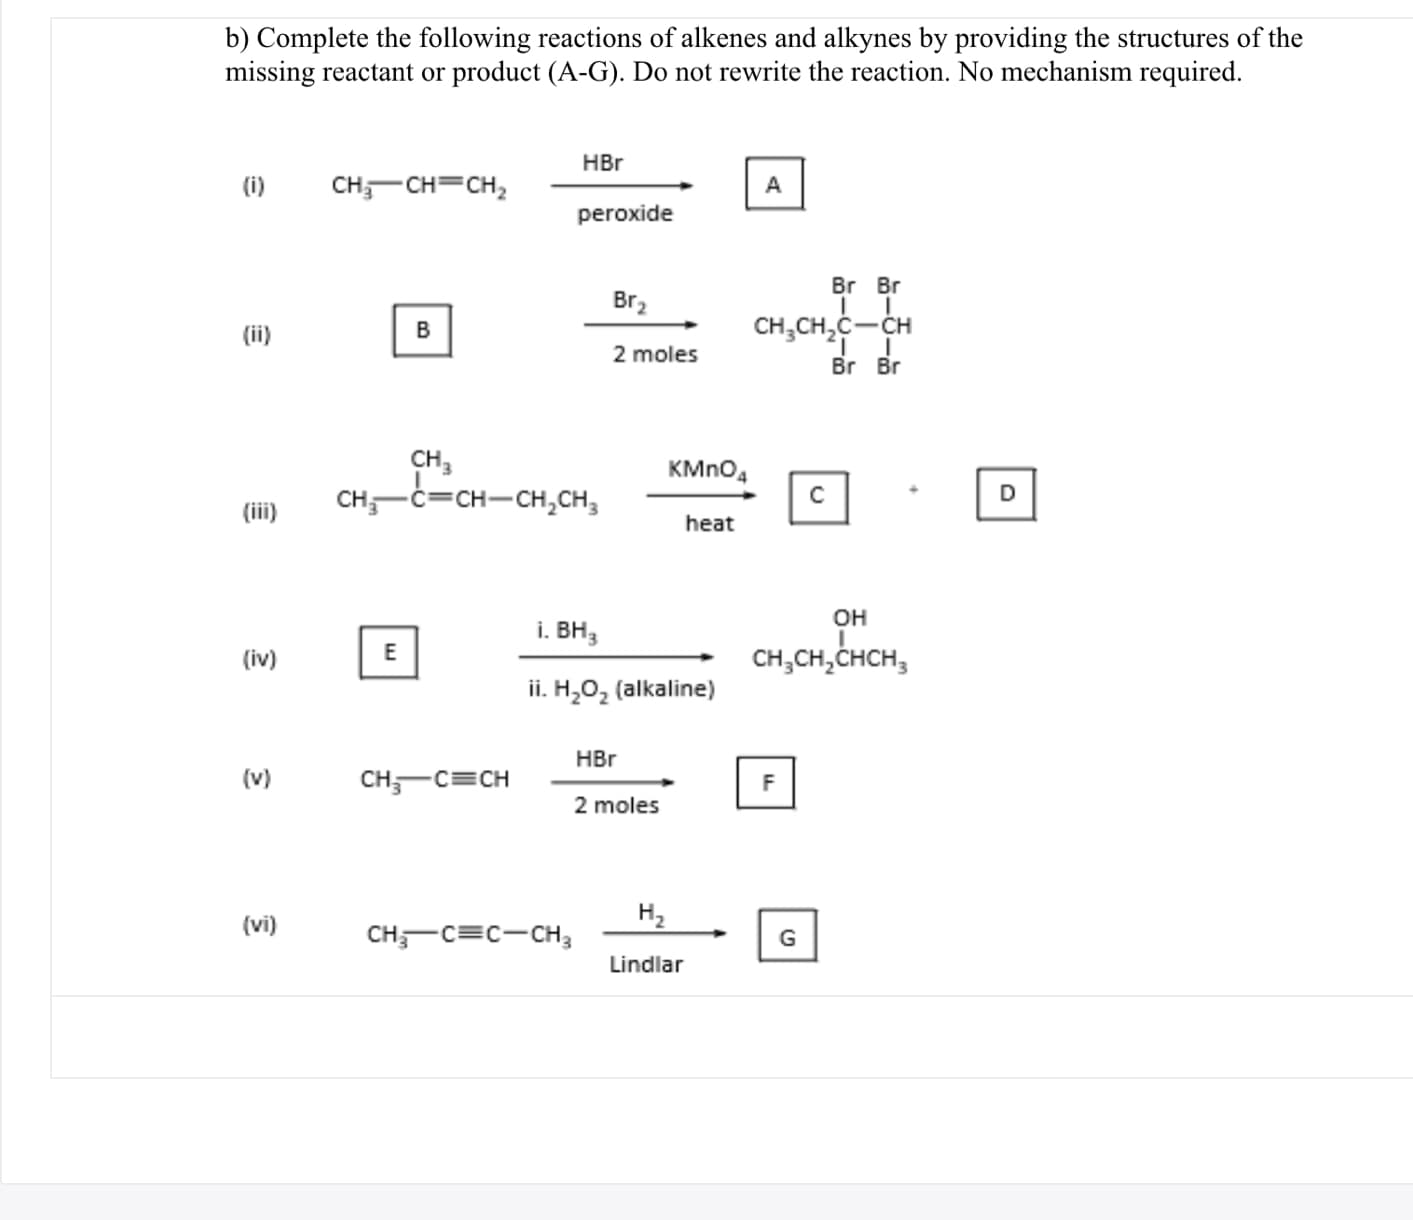 b) Complete the following reactions of alkenes and alkynes by providing the structures of the
missing reactant or product (A-G). Do not rewrite the reaction. No mechanism required.
HBr
(i)
CH,-CH=CH,
A
peroxide
Br Br
Br2
(ii)
B
CH,CH,C-CH
2 moles
Br Br
CH,
CH,-C=CH-CH,CH,
KMNO,
(iii)
heat
